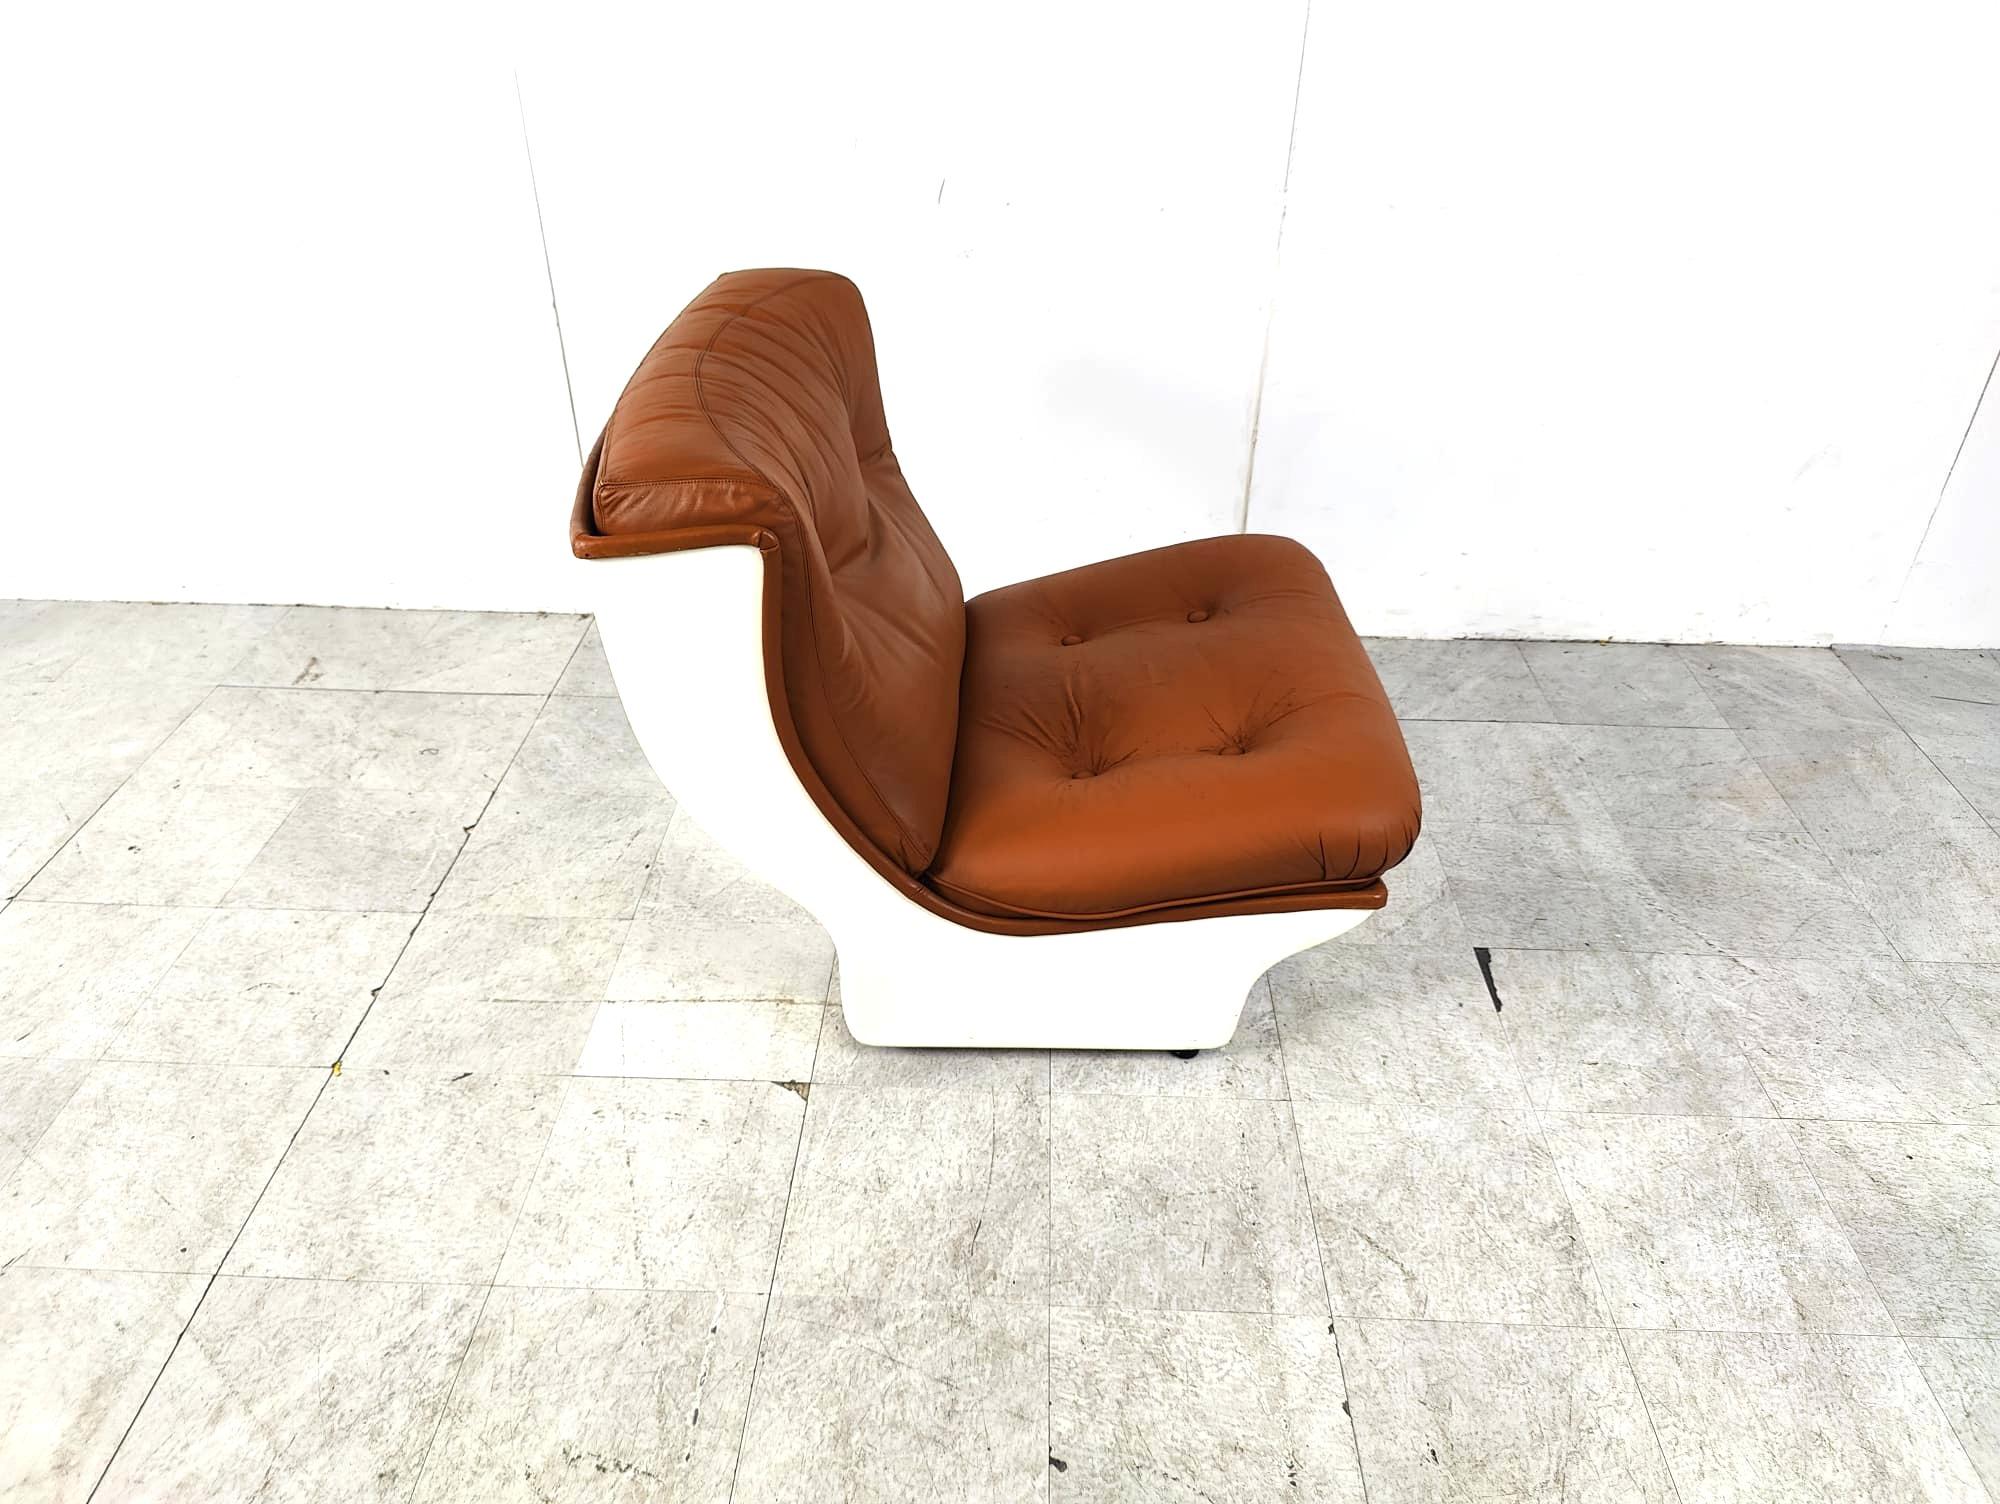 Space age leather lounge chair by Airborne international, 1970s For Sale 2